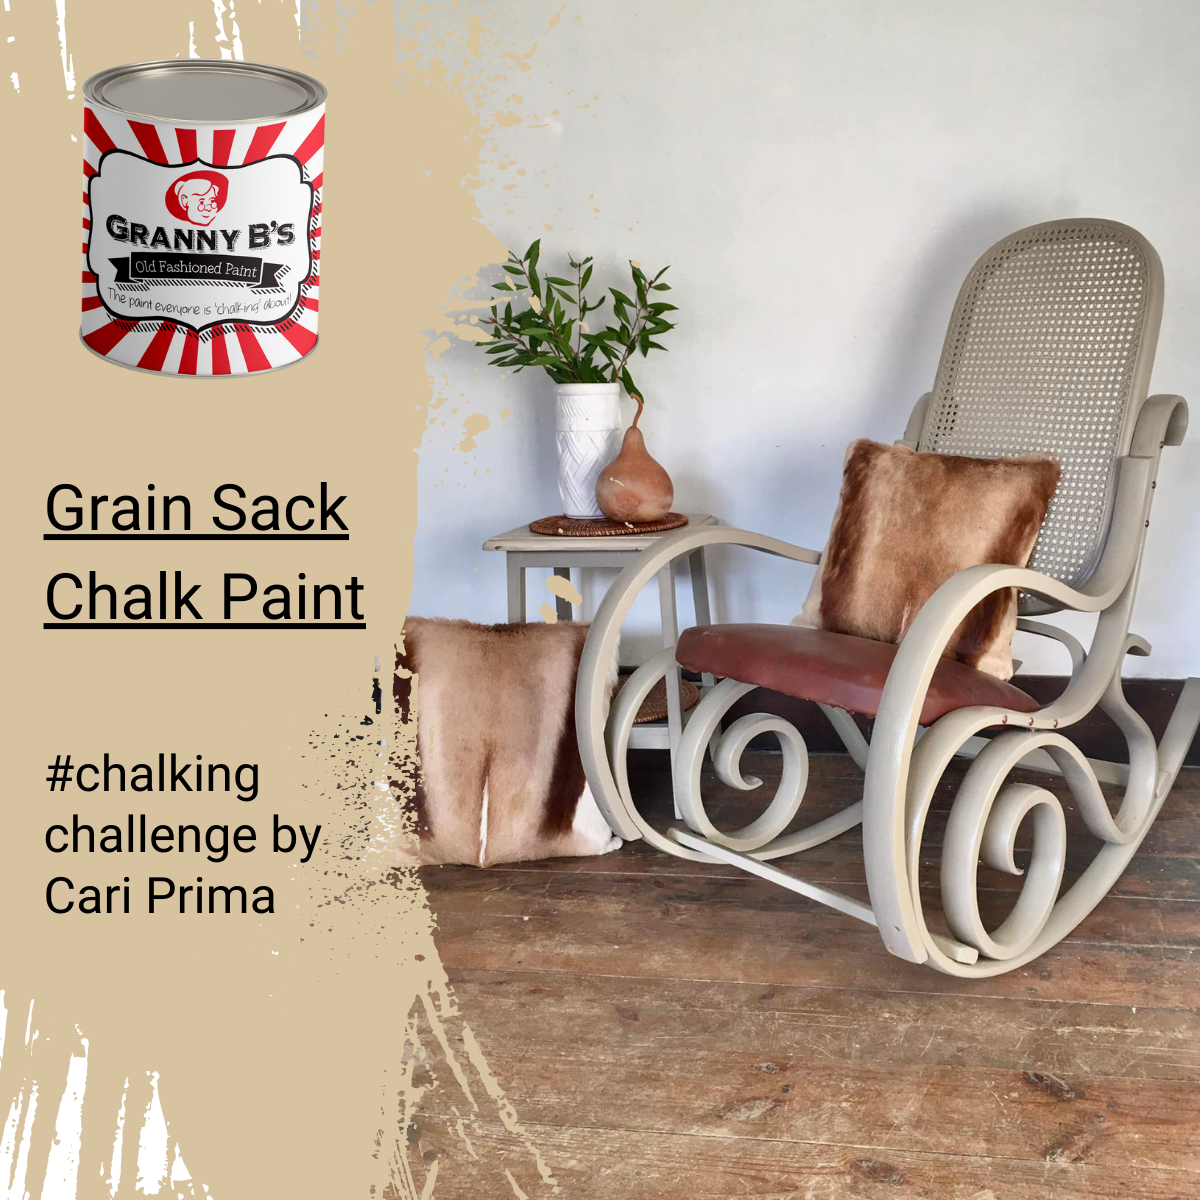 Old Fashioned Paint - Grain Sack (Beige Slate) - Granny B's Old Fashioned Paint